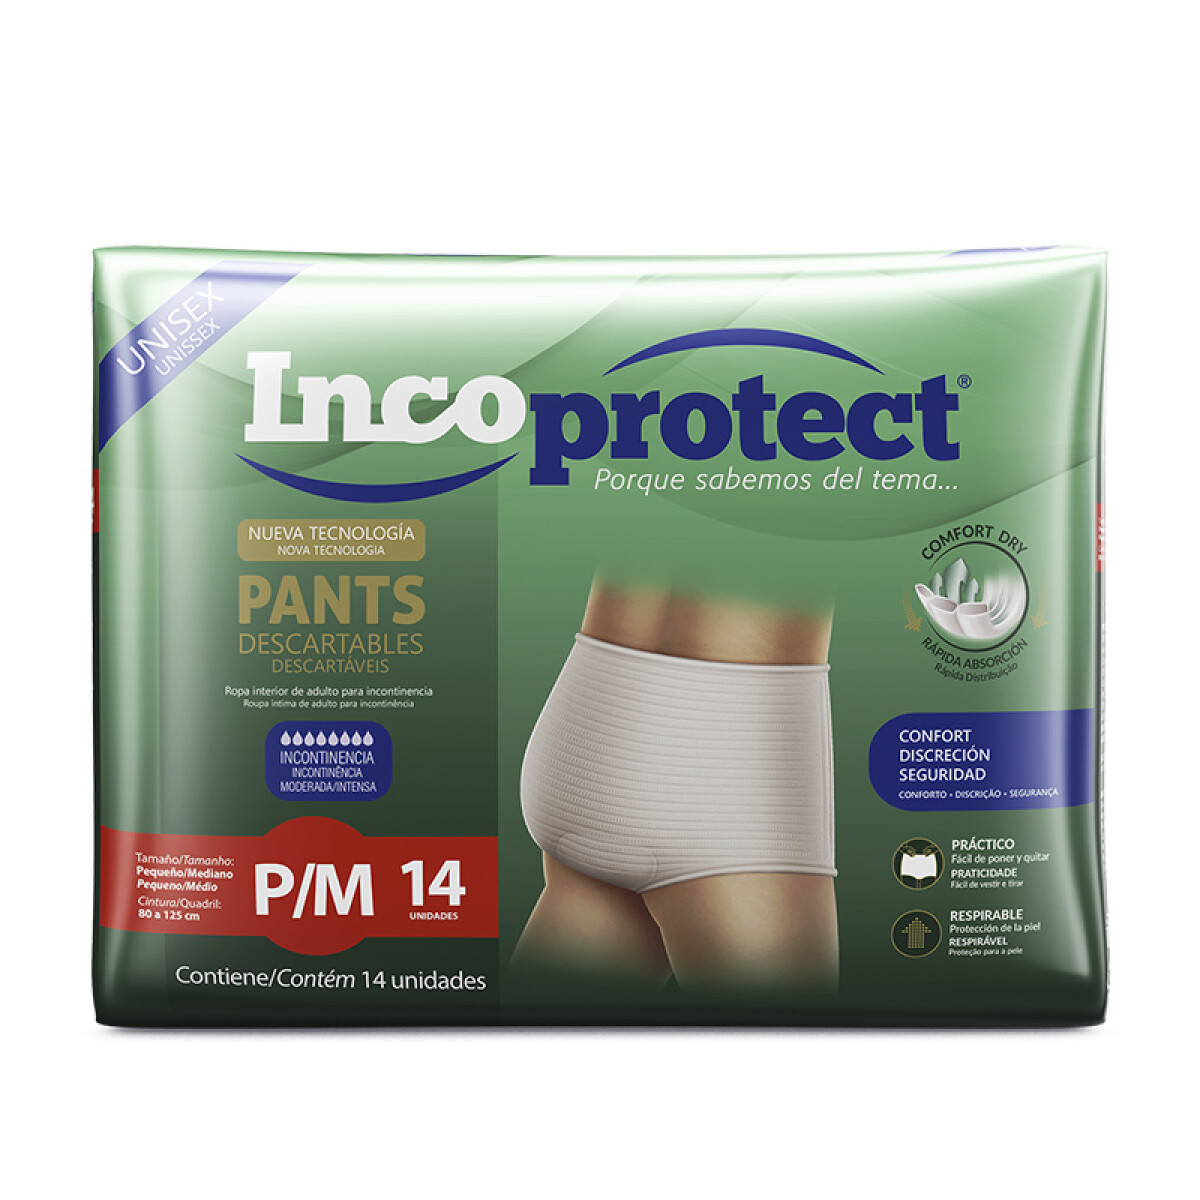 Incoprotect Pants - talle P/ M 